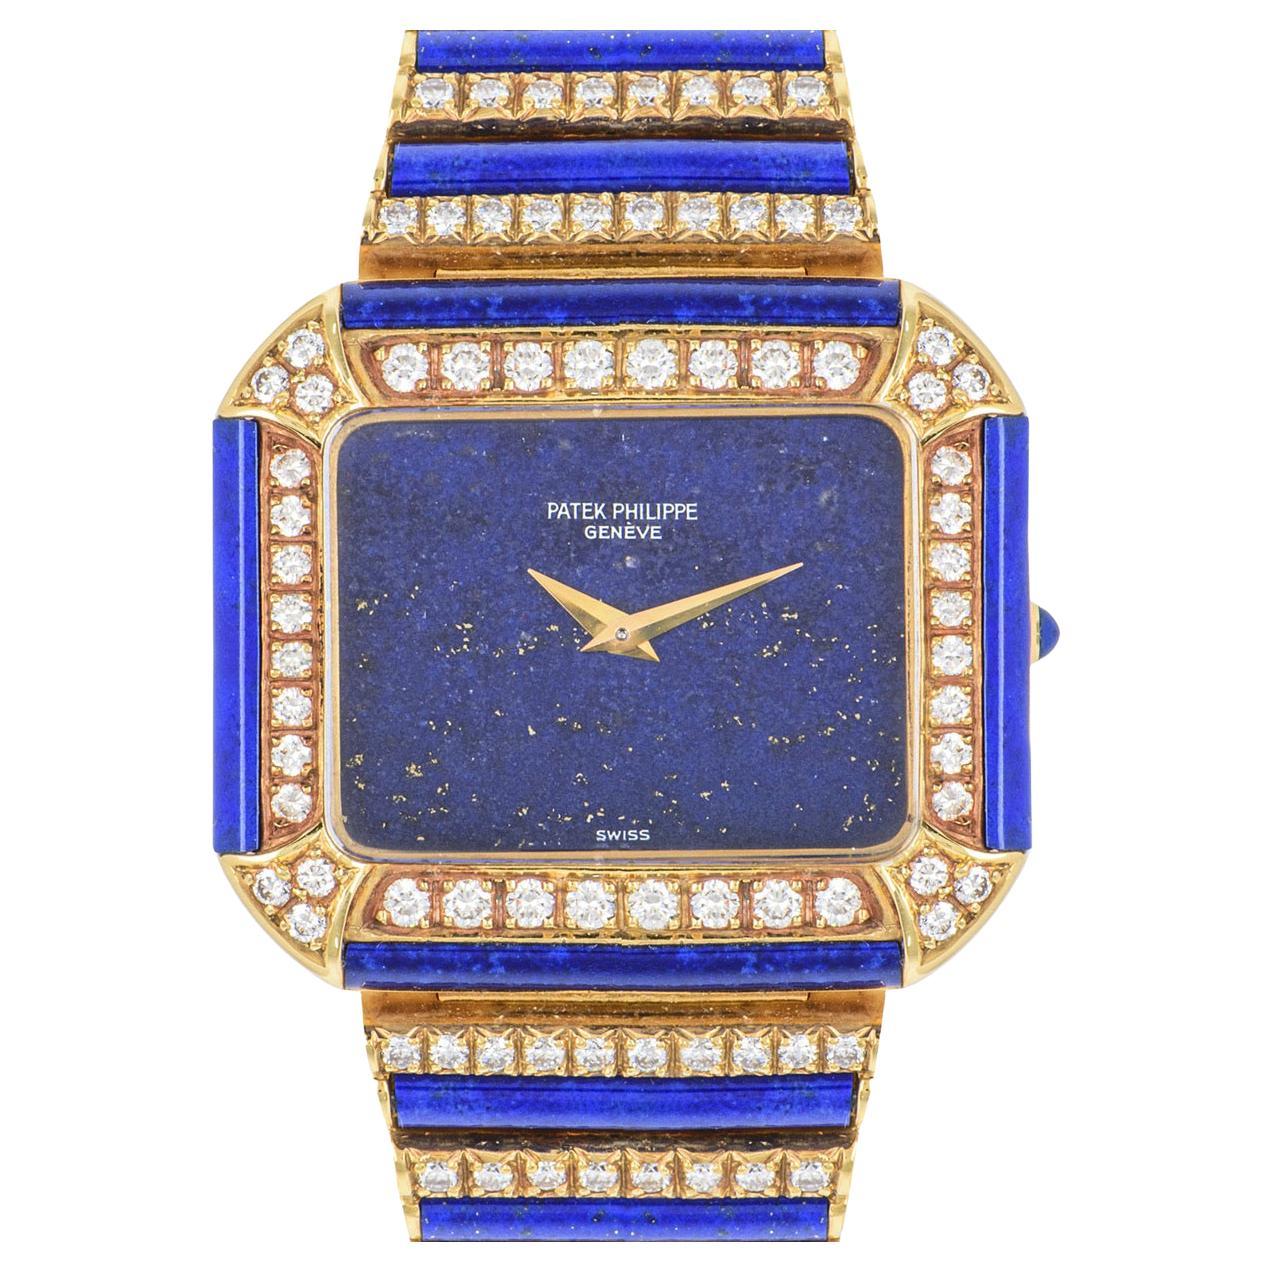 A very rare vintage Cocktail watch by Patek Philippe in yellow gold. Featuring a lapis lazuli dial and diamond set bezel. The bezel is also set with lapis, as is the crown.

The lapis and diamond set bracelet comes equipped with a jewellery style